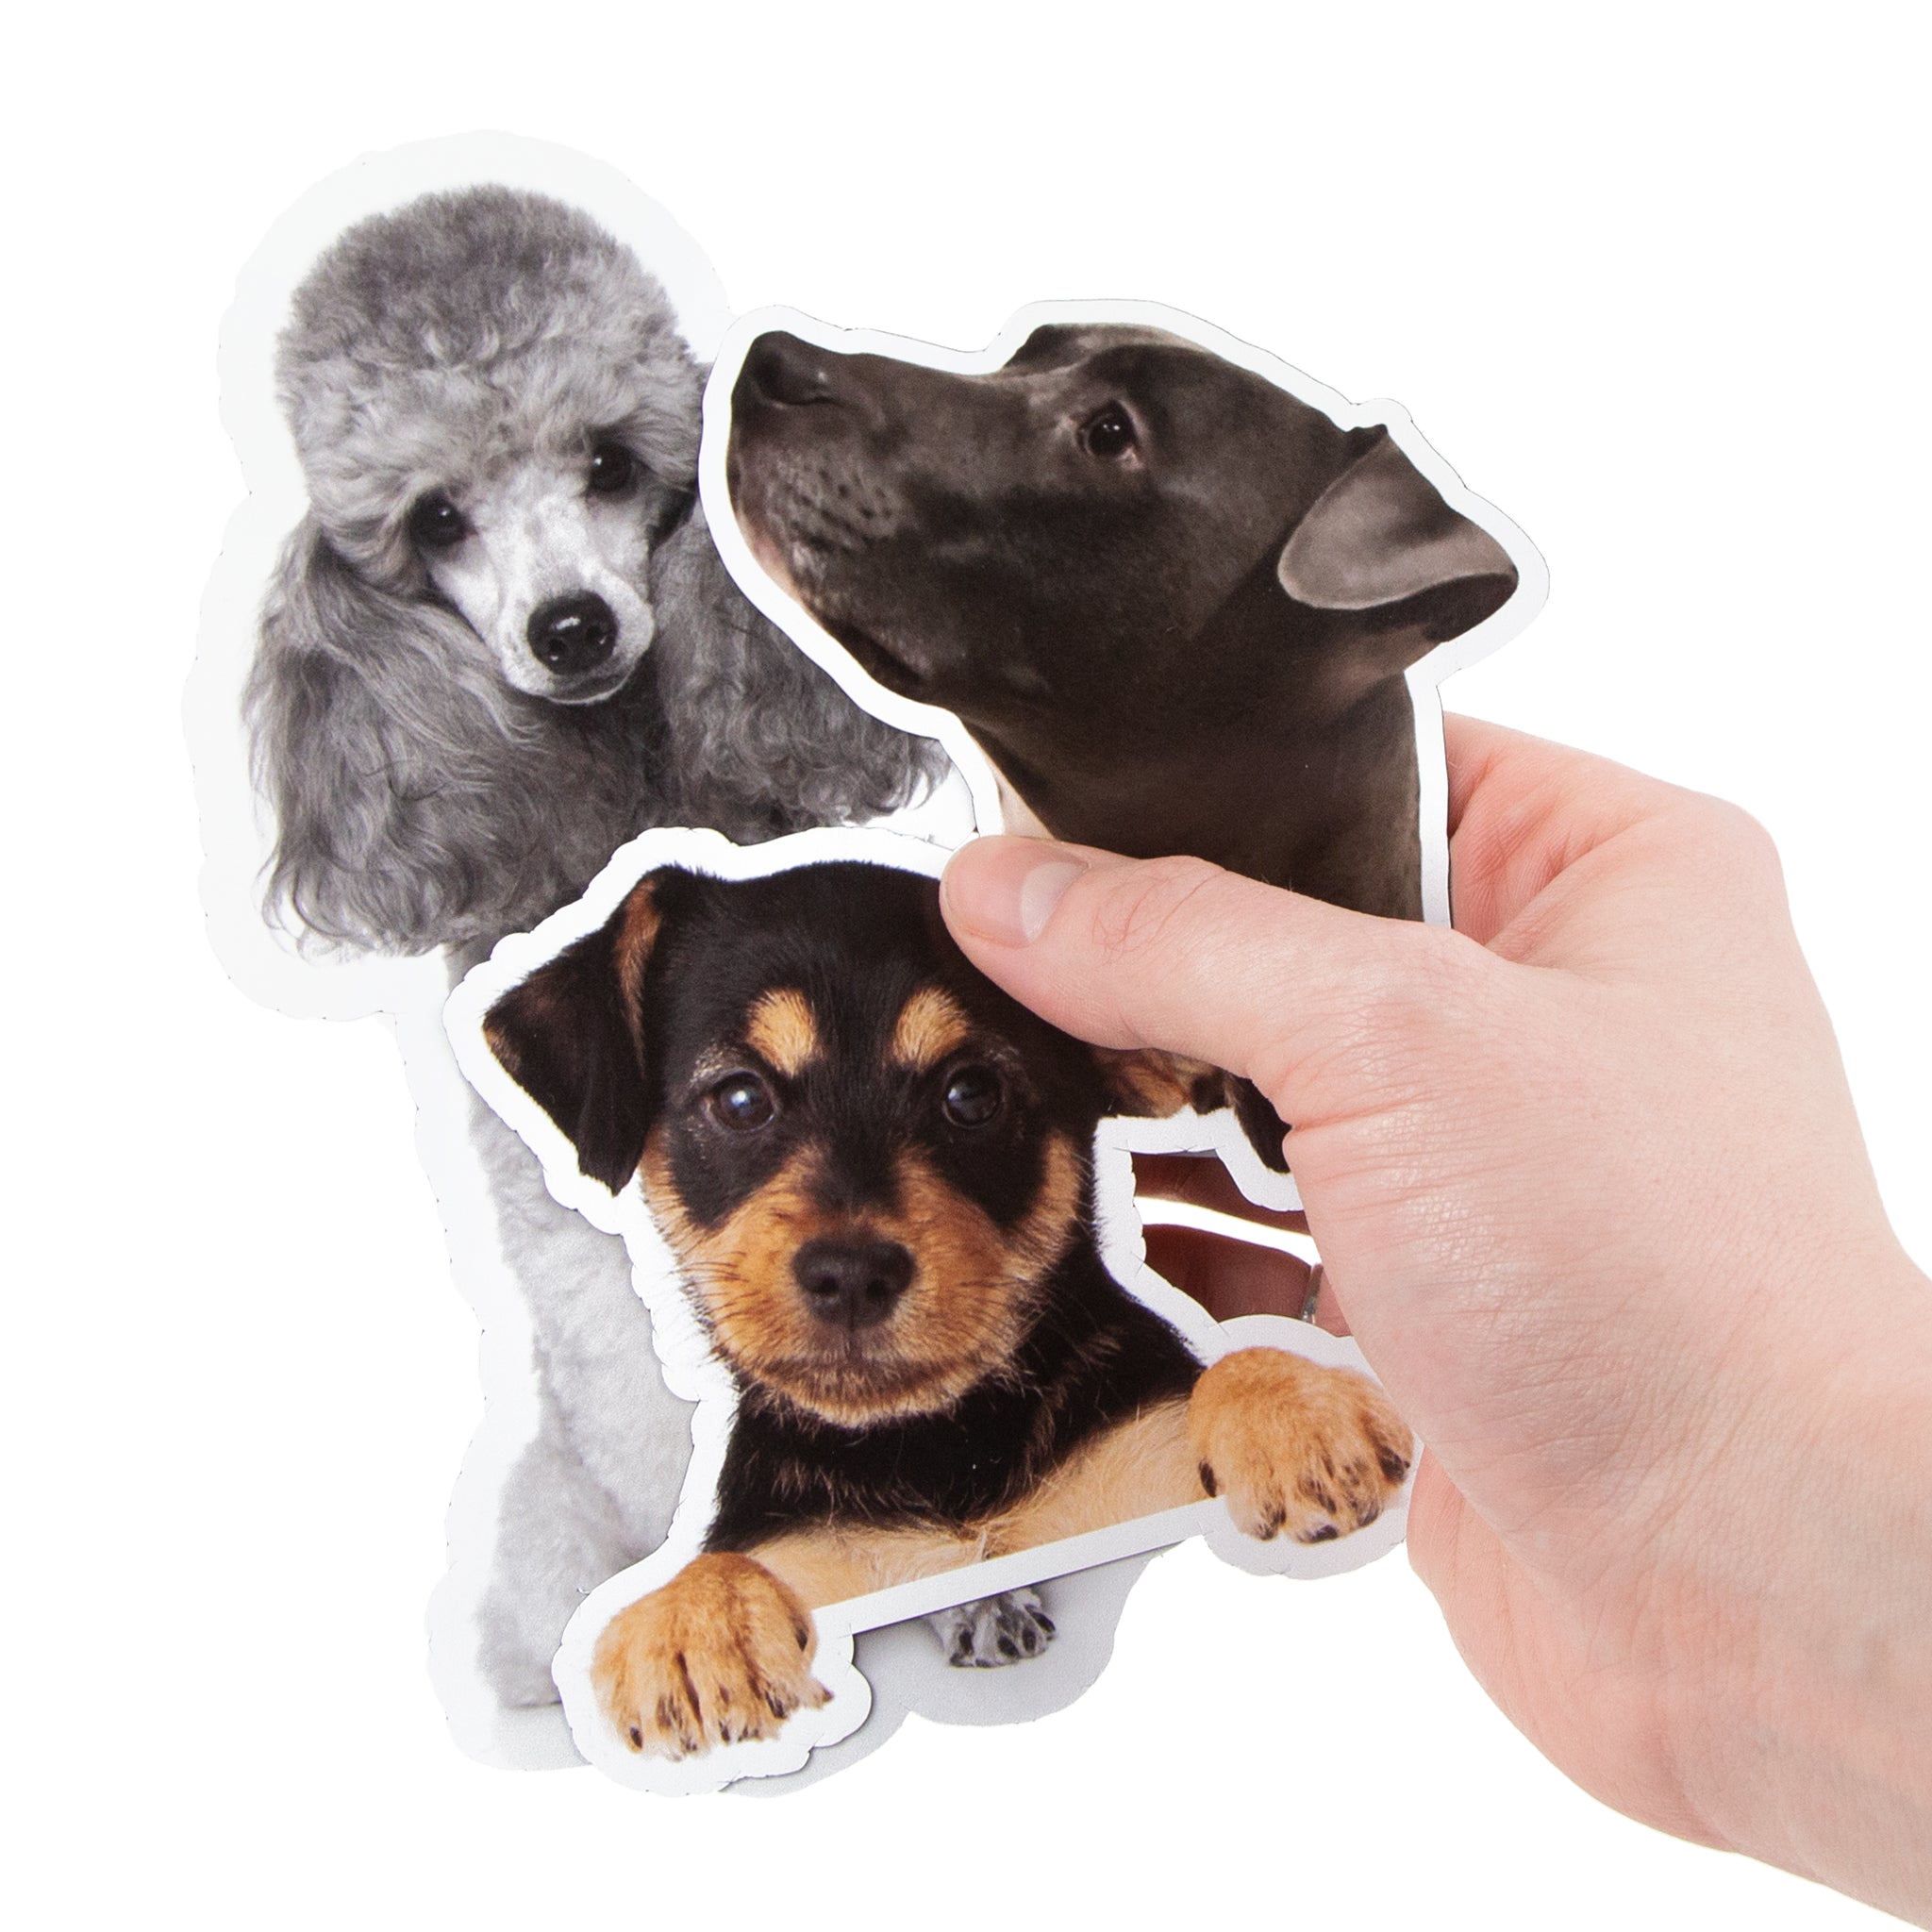 Dog Sticker Bundle Dog Sticker Bundle Stickers With Dogs Stickers